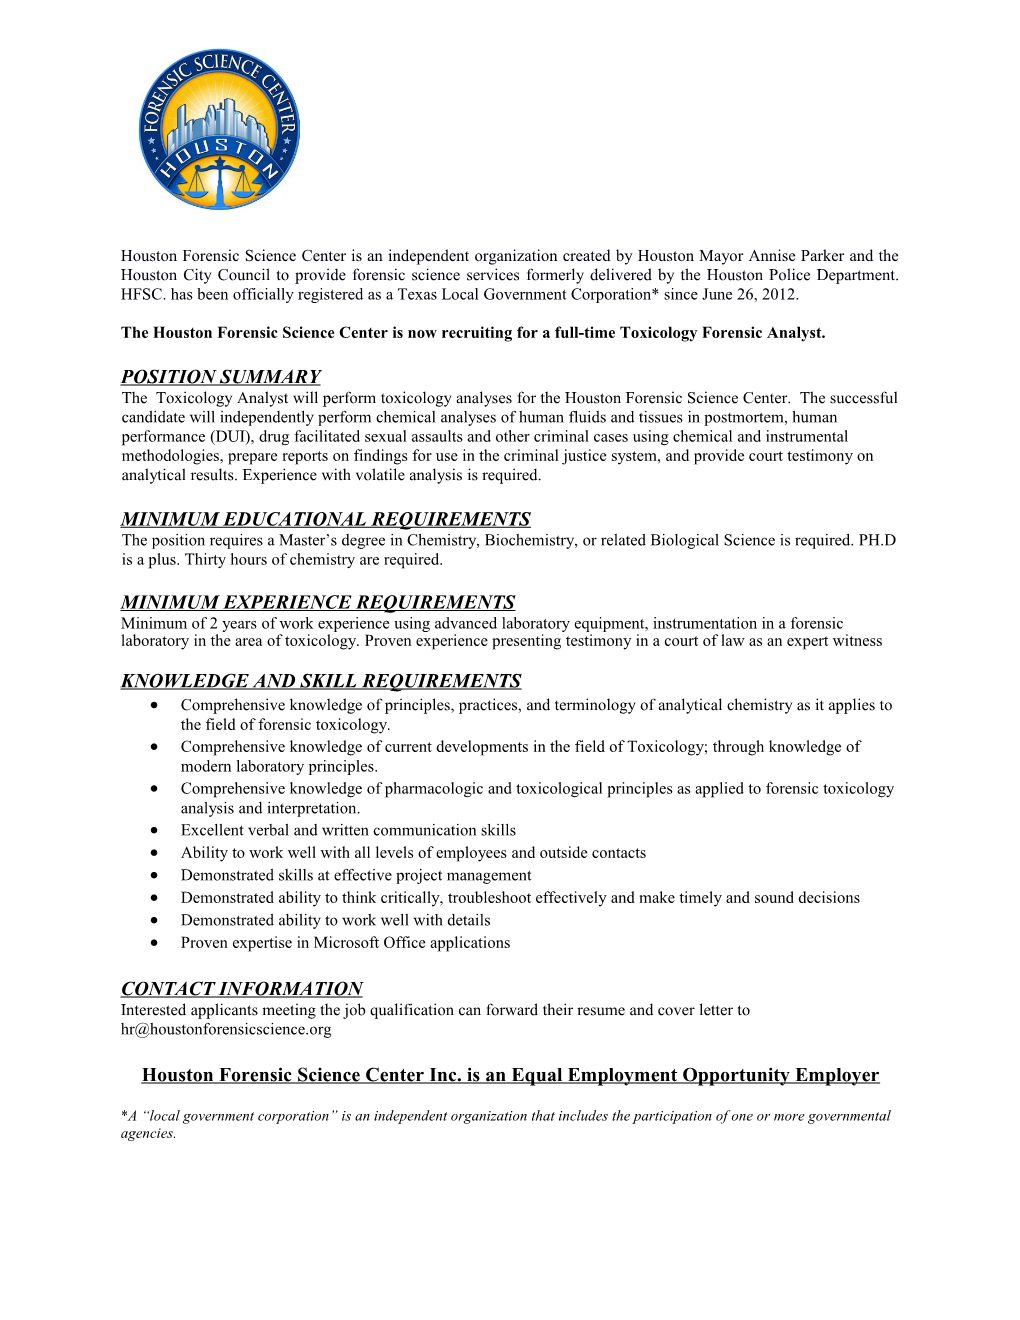 The Houston Forensic Science Center Is Now Recruiting for a Full-Time Toxicology Forensic